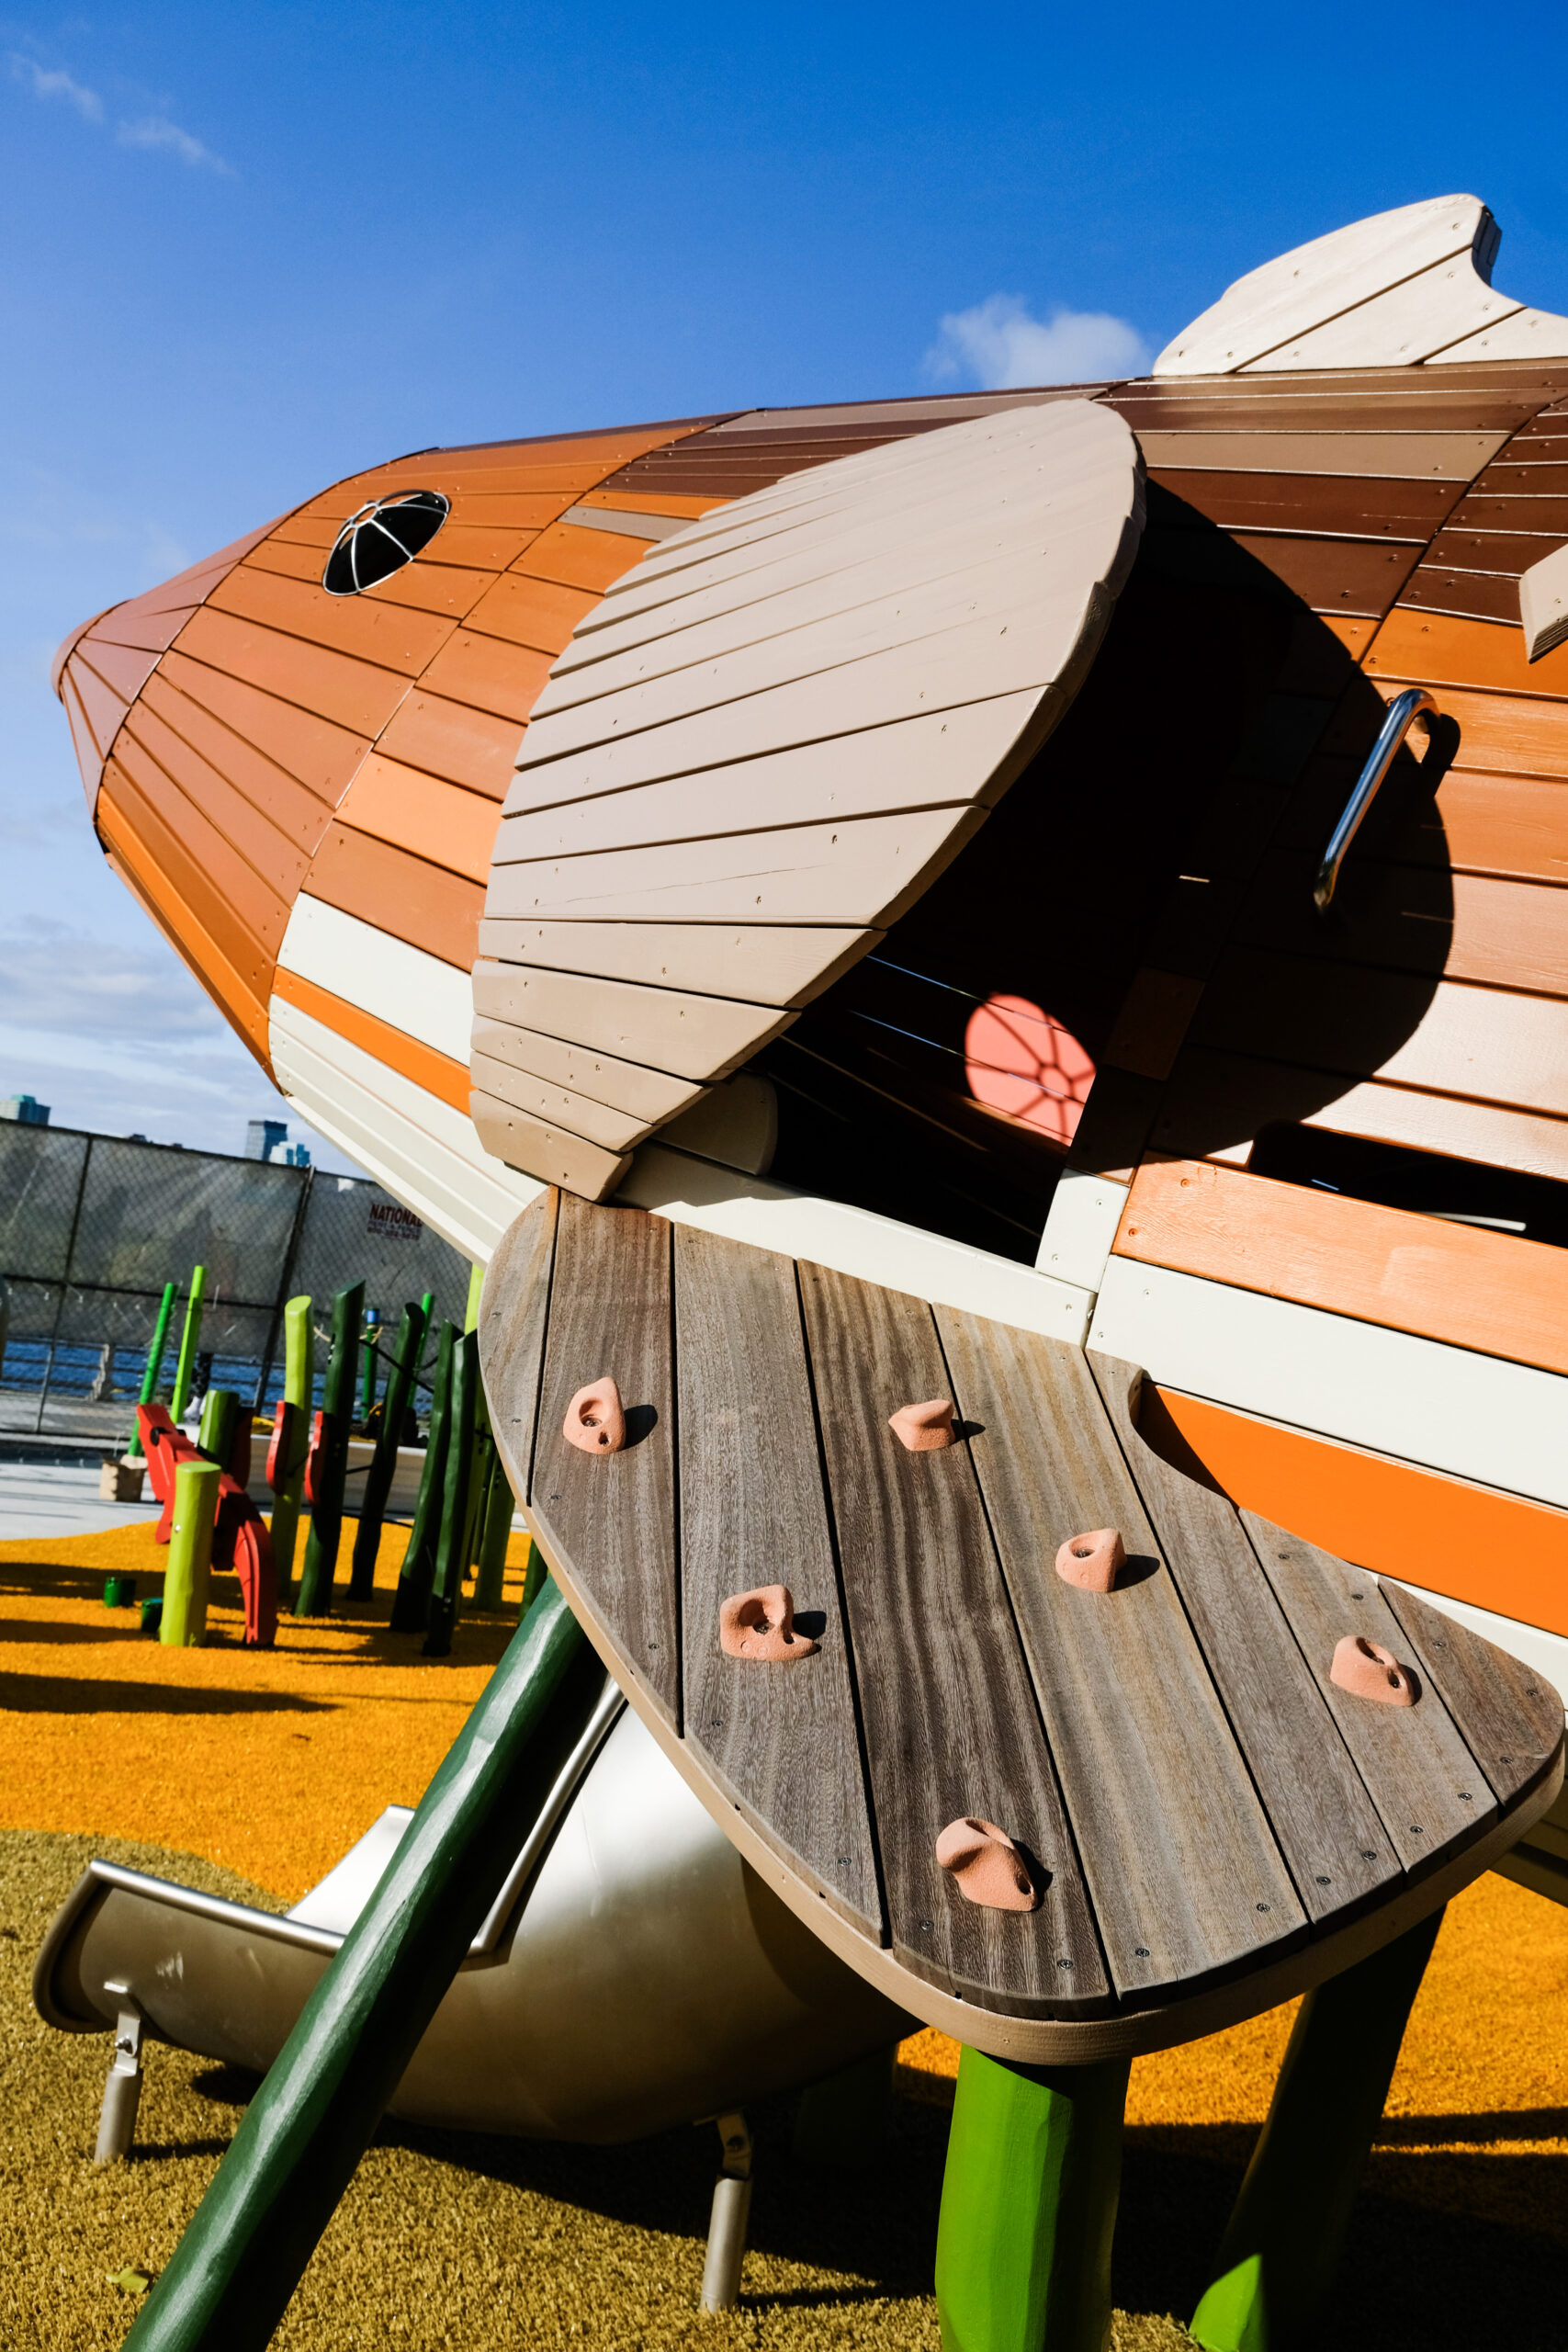 A playground structure shaped like a sturgeon has a series of climbing grips to bring playground visitors inside the sturgeon